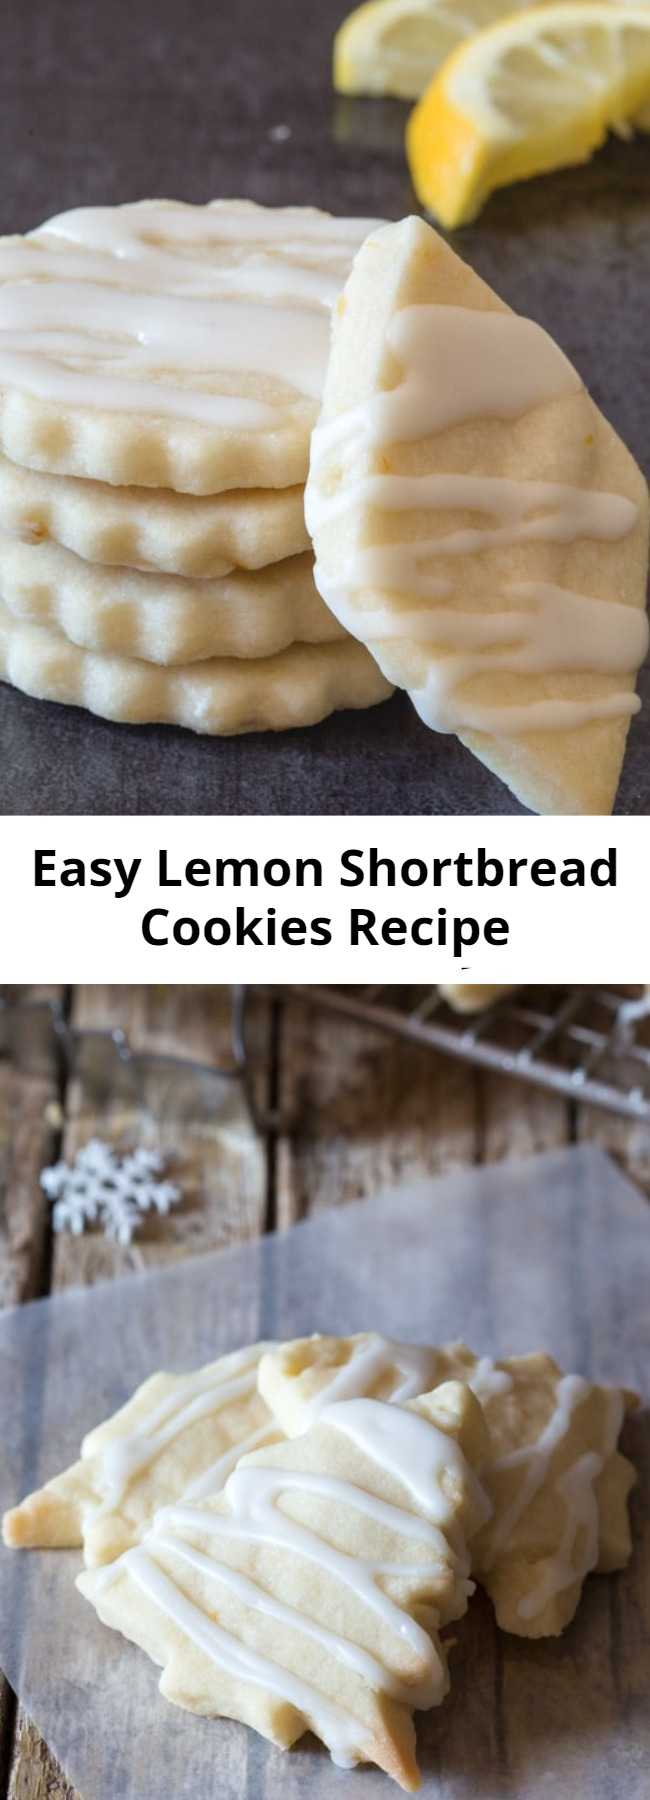 Easy Lemon Shortbread Cookies Recipe - Shortbread Cookies are a must and these Lemon Shortbread are the perfect Lemon Lovers melt in your mouth Cookie.